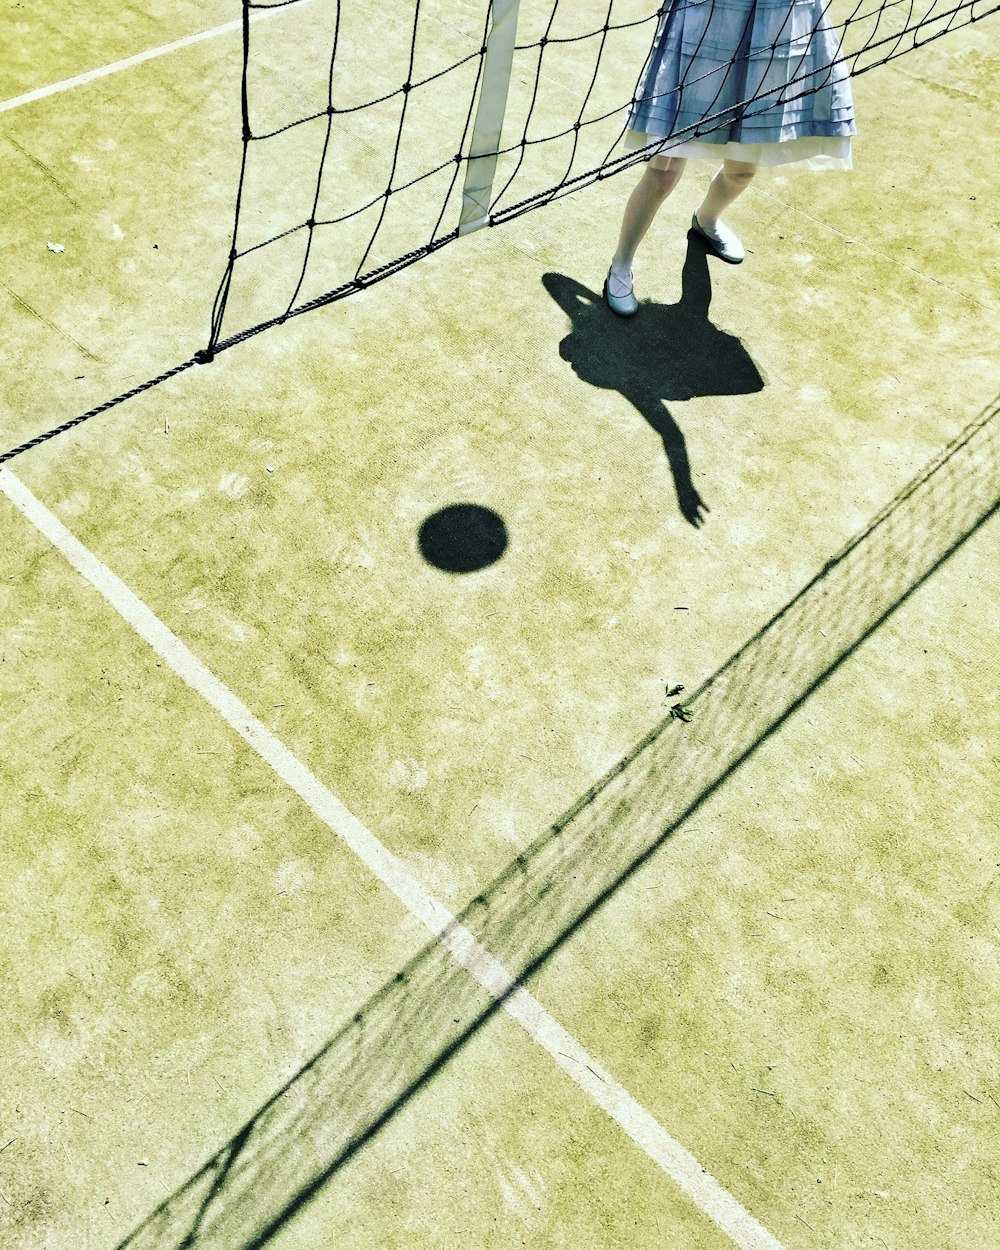 shadow reflection of girl playing volleyball